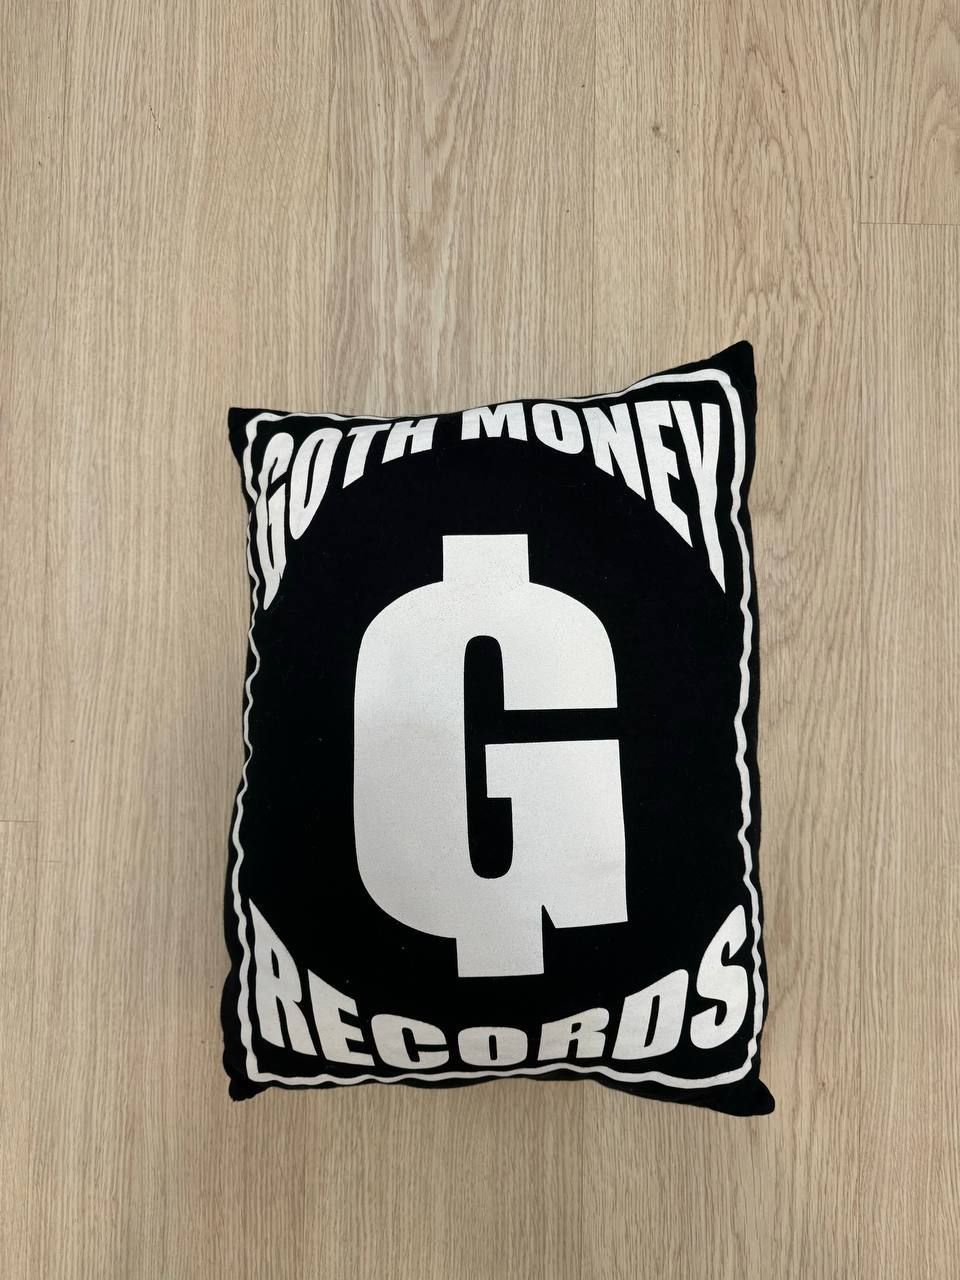 Pre-owned Drain Gang X Goth&money Goth Money Records Pillow In Black